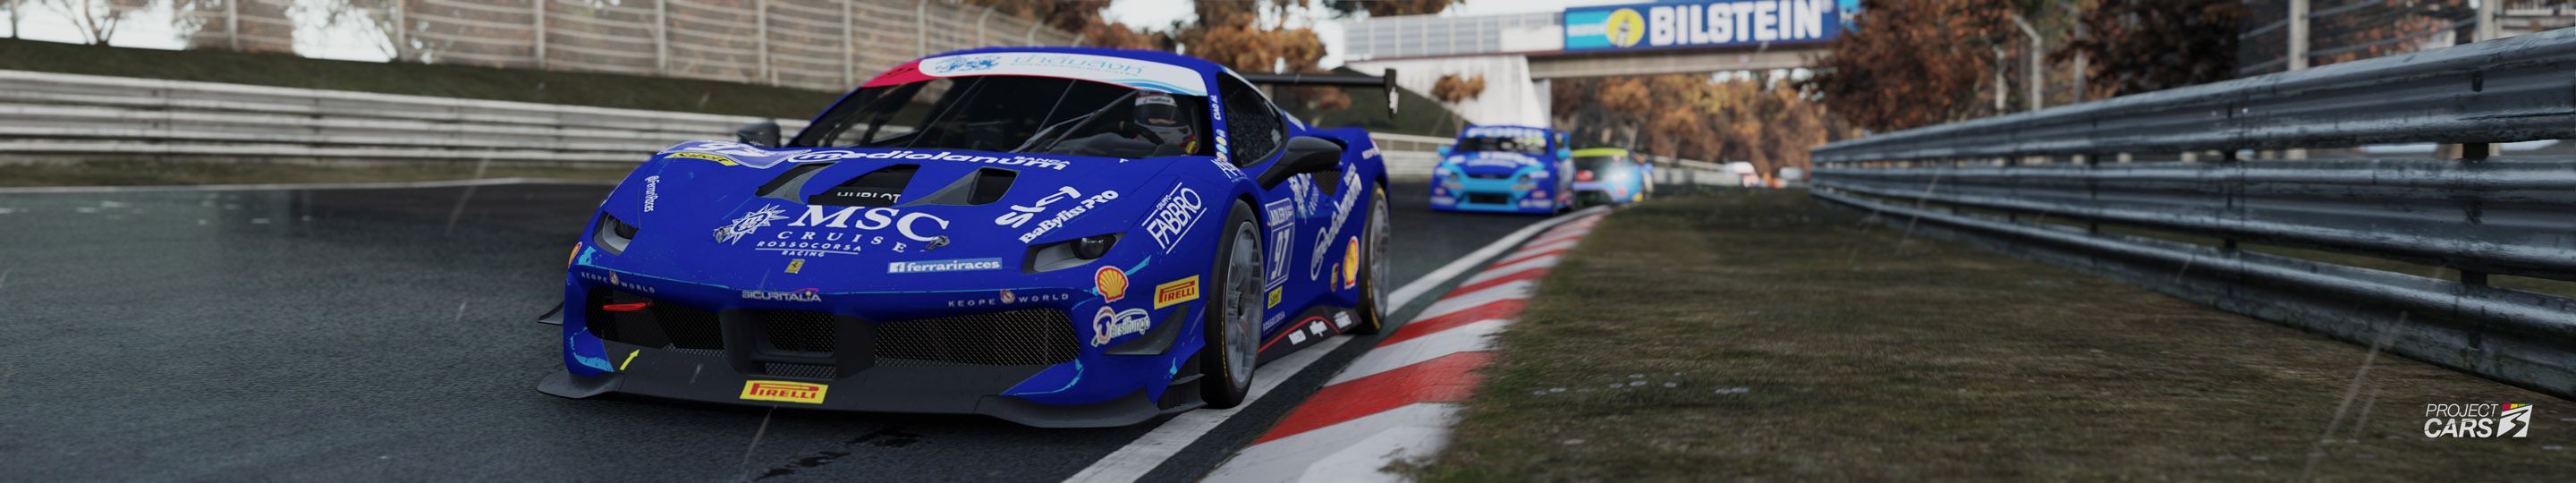 8 PROJECT CARS 3 GT3 at NORDSCHLEIFE copy.jpg